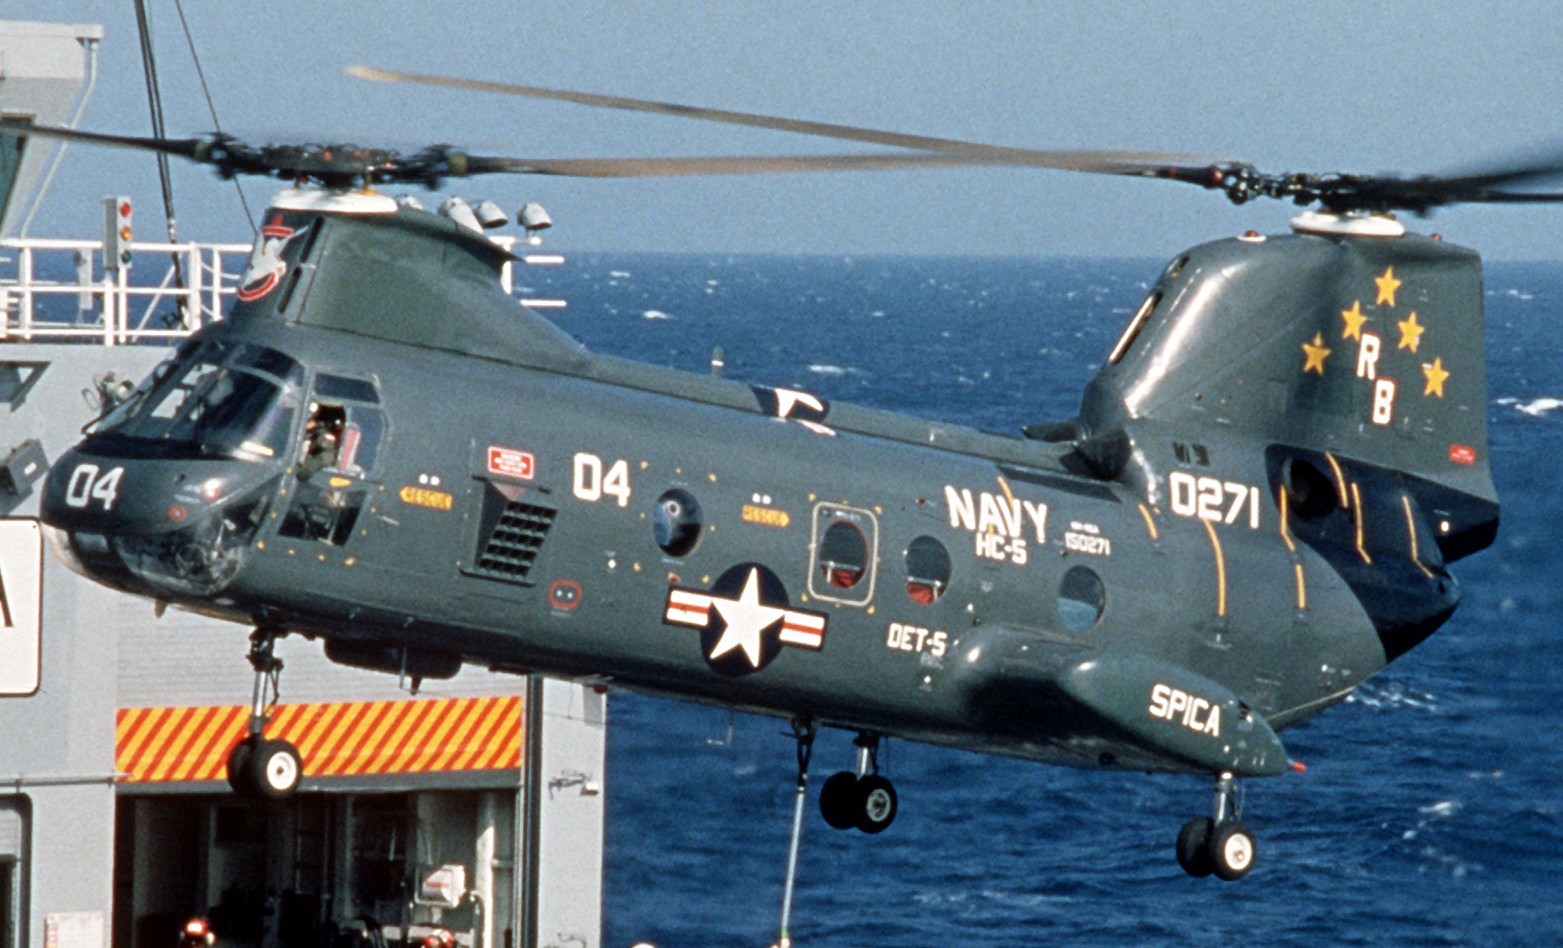 hc-5 providers helicopter combat support squadron navy hh-46a sea knight 67